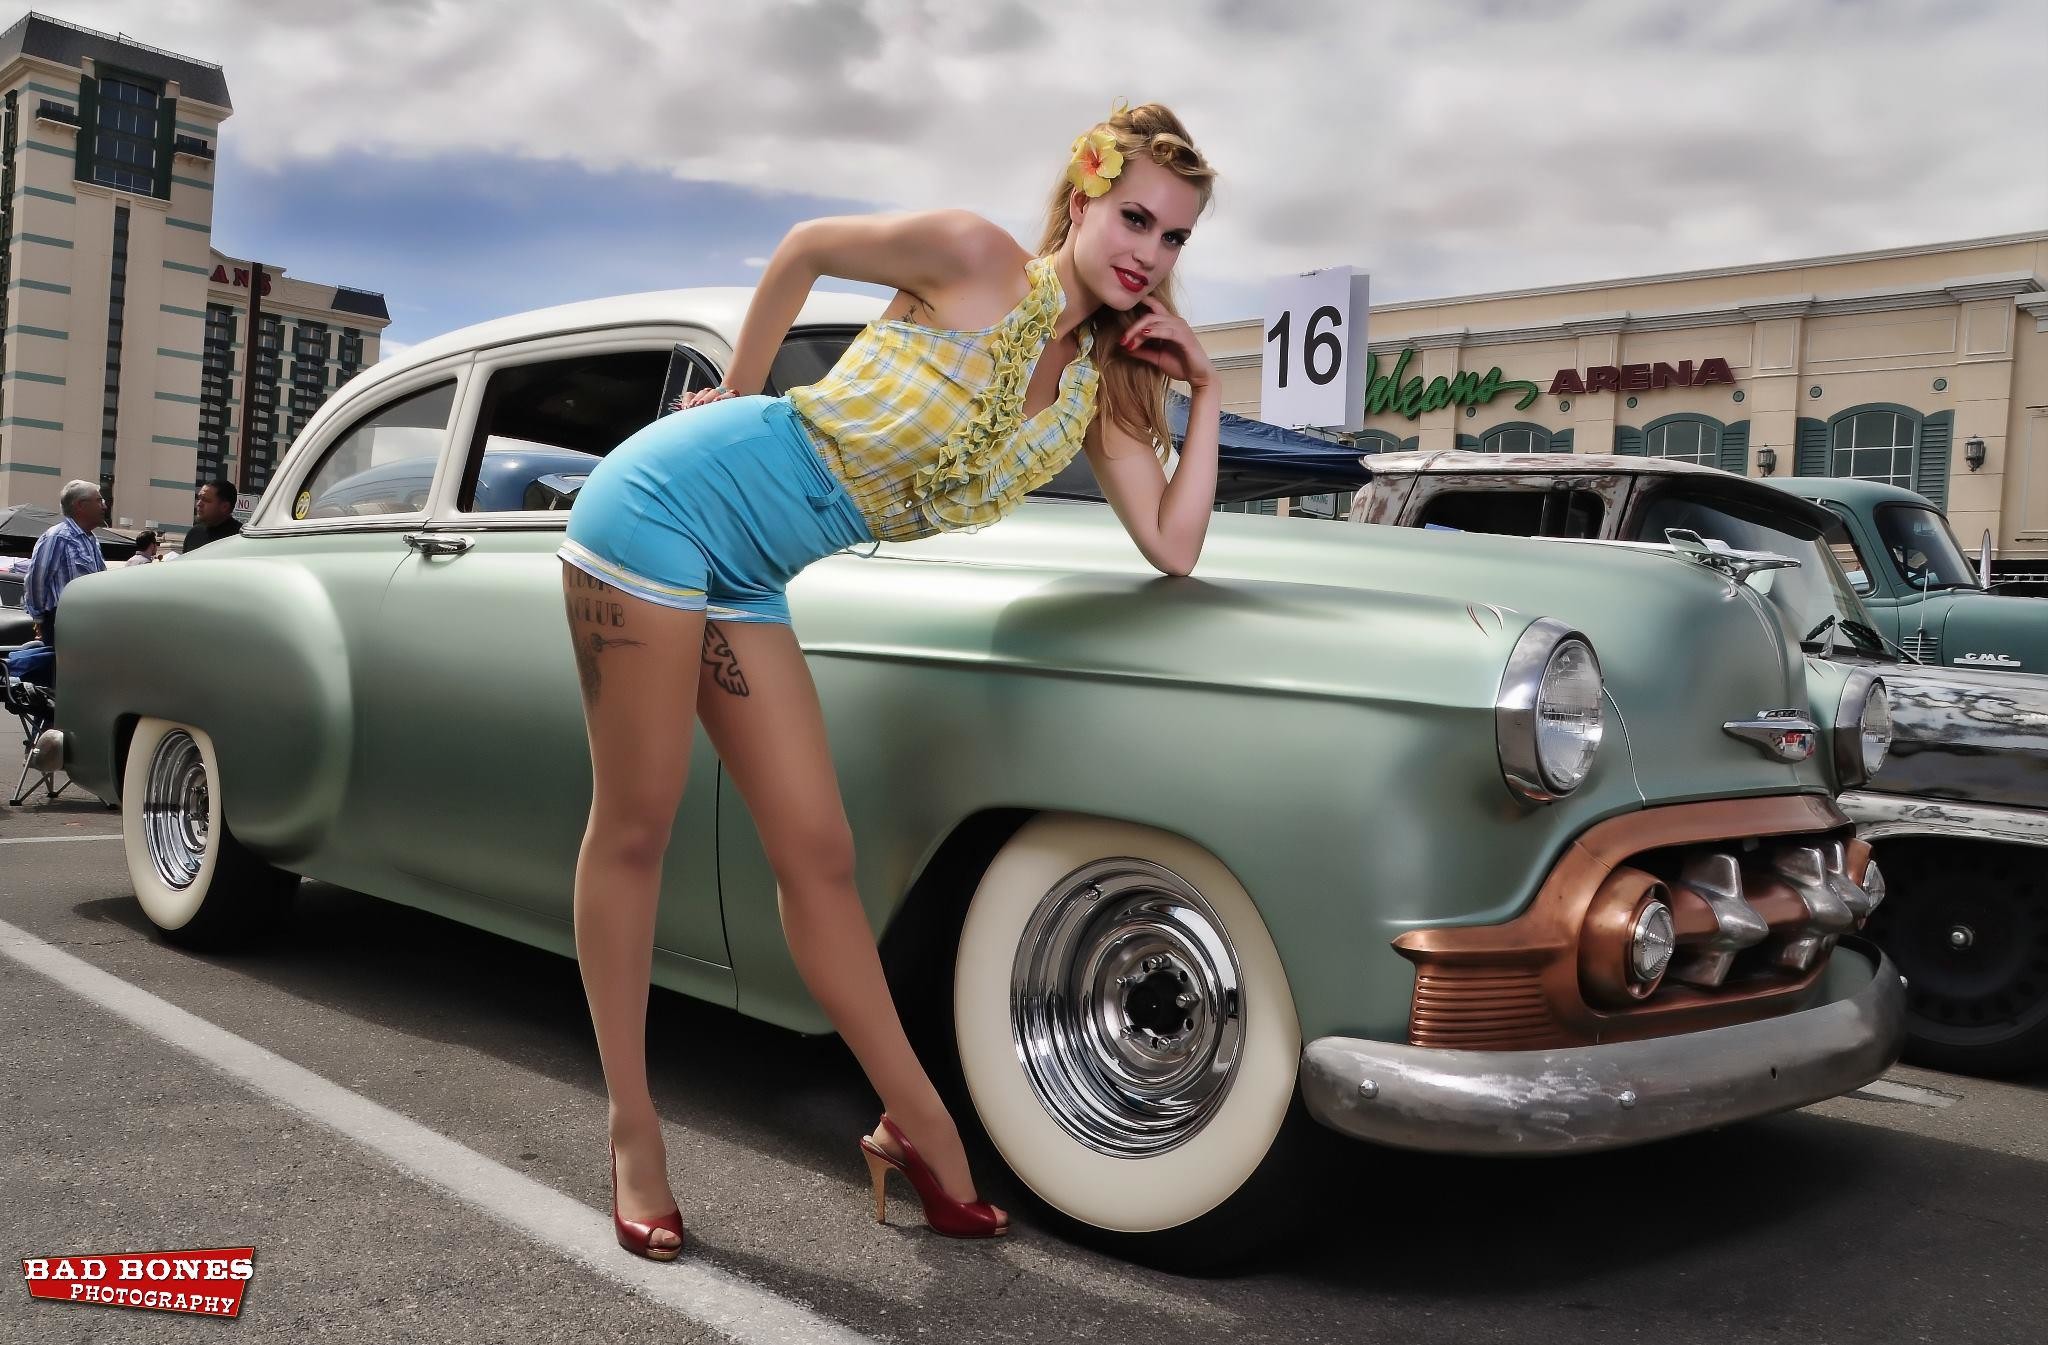 2048x1345 Explore Hot Rod Cars, Hot Rods, and more! Pin up Girl Wallpaper ...